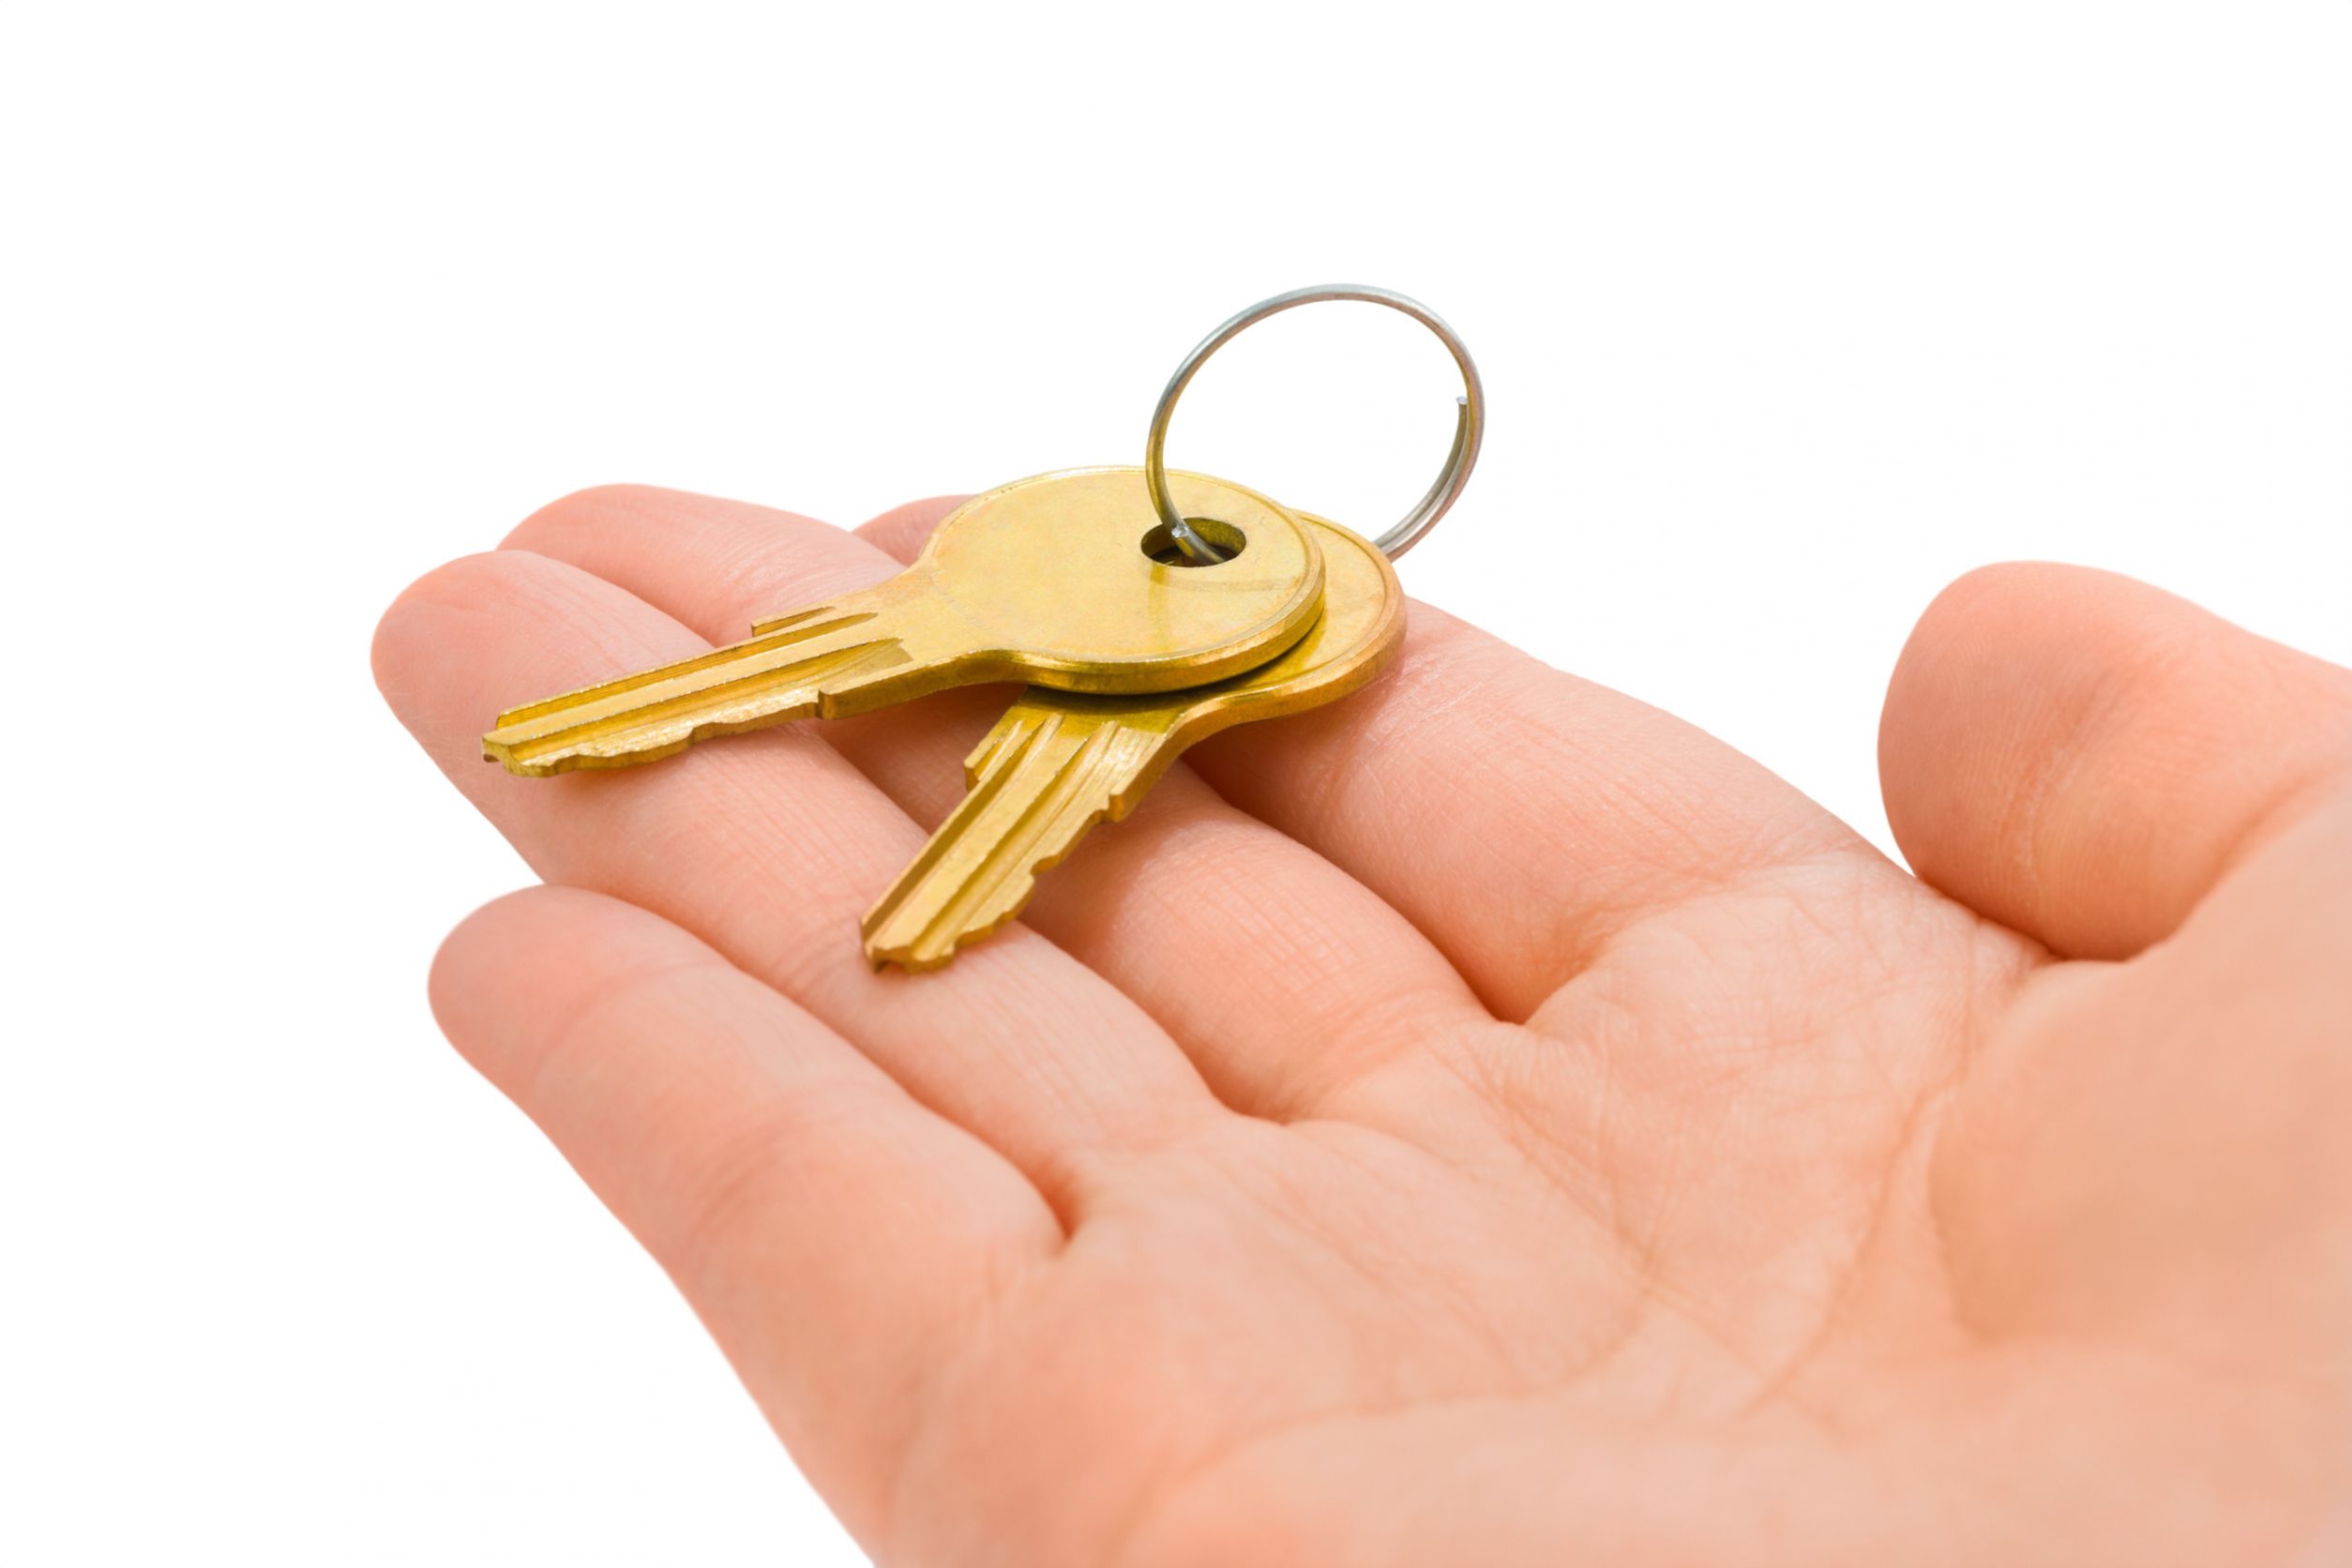 WHY DOES YOUR BUSINESS NEED TO HIRE A COMMERCIAL LOCKSMITH IN ST LOUIS MO?